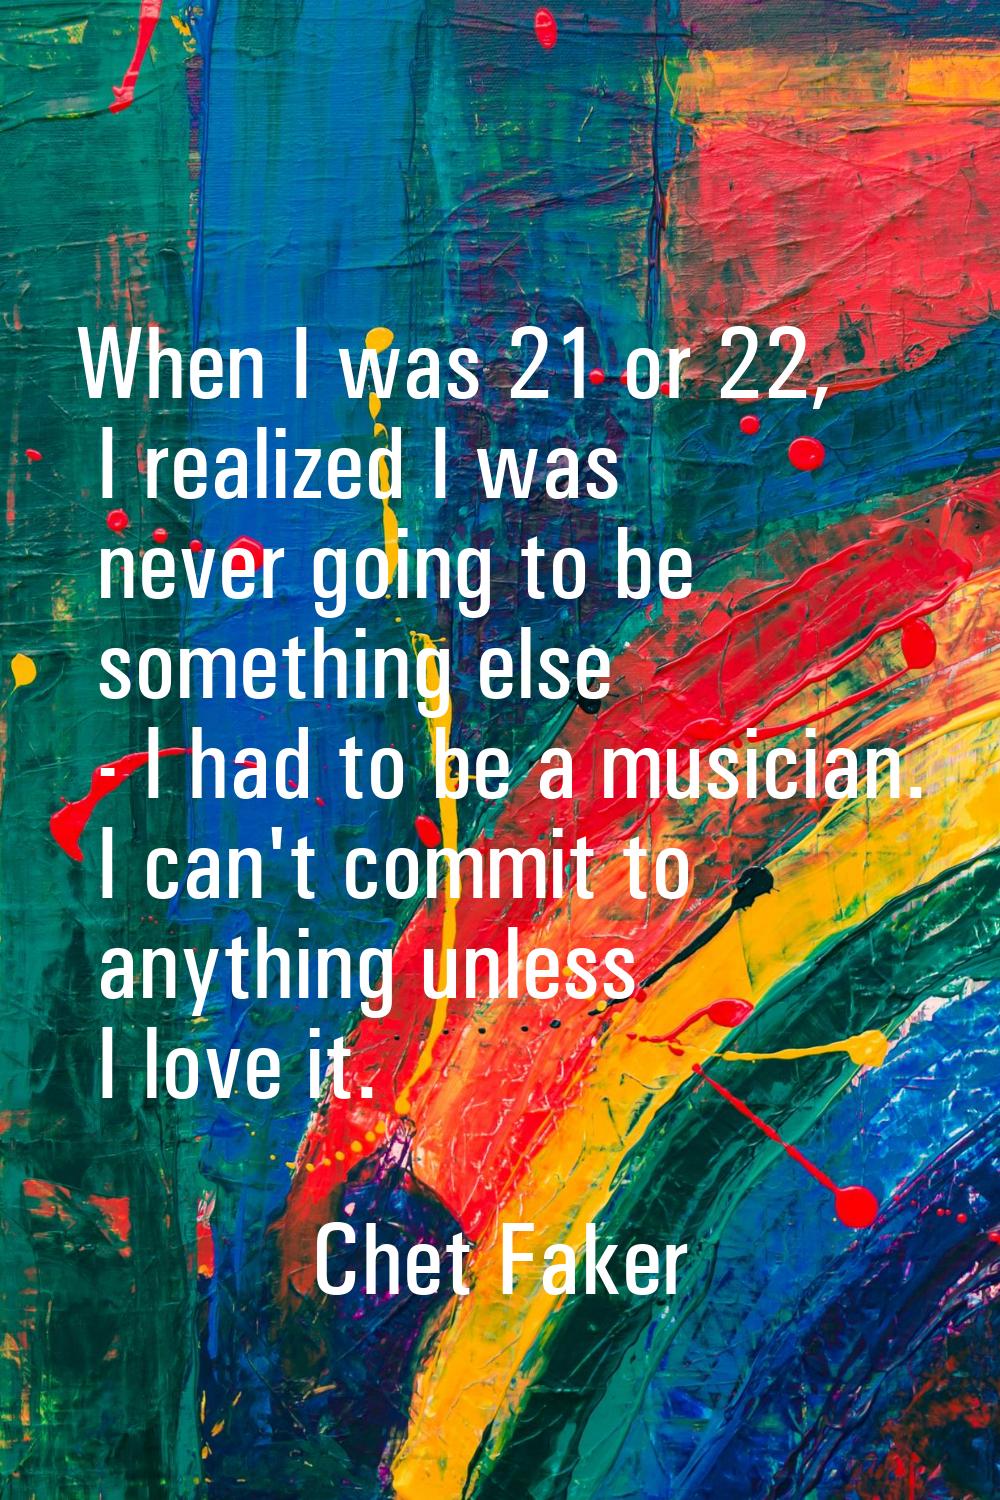 When I was 21 or 22, I realized I was never going to be something else - I had to be a musician. I 